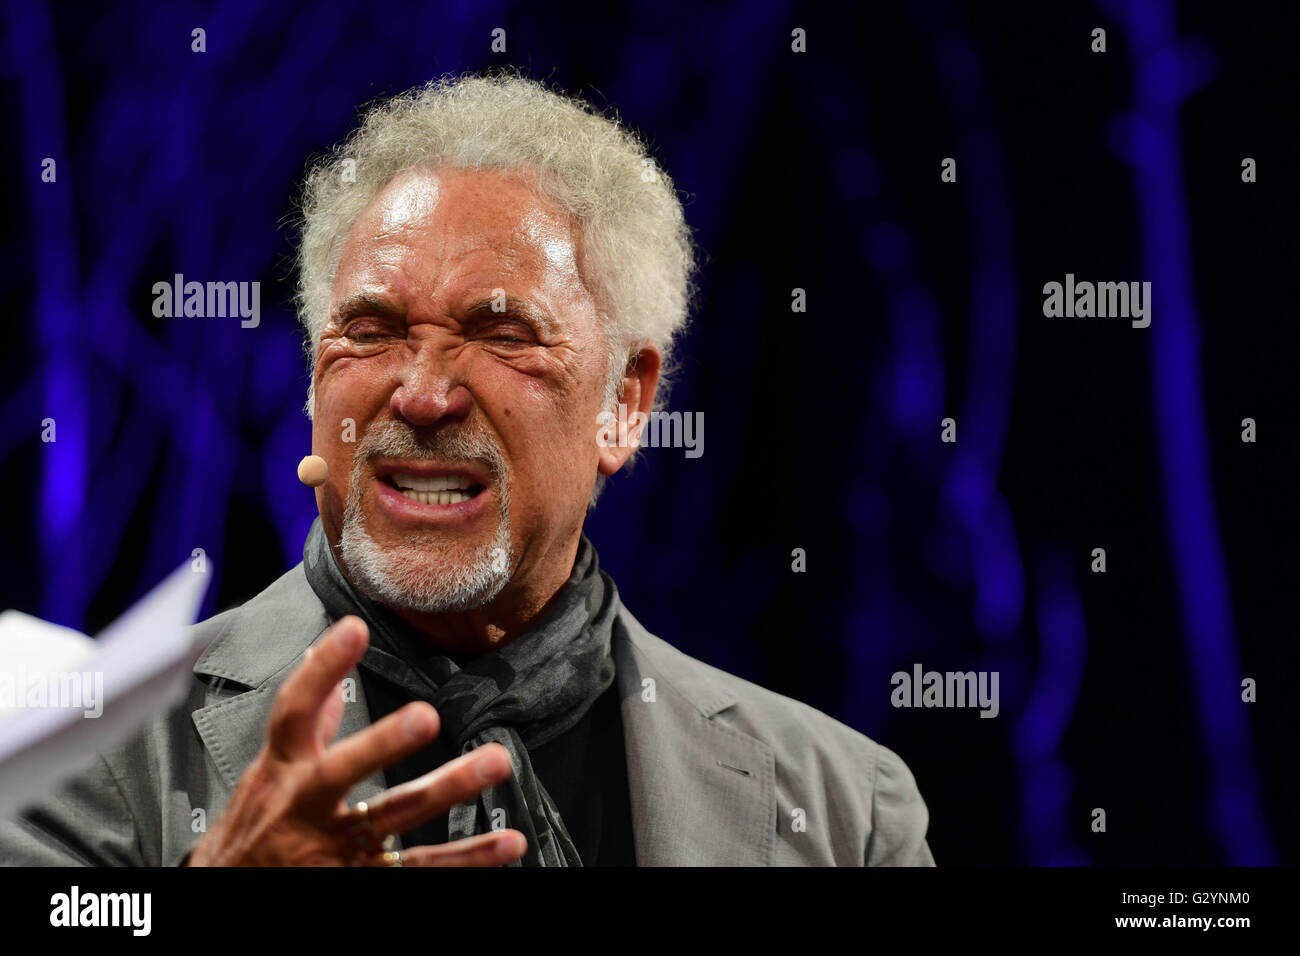 Hay Festival 2016, Hay on Wye, Powys , Wales UK  Sunday June 05 2016  Sir Tom Jones, speaking in public for the first time since the death of his wife, Melinda Trenchard, in April 2016, talking about his new autobiography 'Over the Top and Back'  on the final day of the 2016 Hay Festival of Literature and the Arts  For ten days in late May and early June  the small town of Hay on Wye on the  Wales-England border becomes the 'Woodstock of the Mind', and attracts some of the worlds best writers, novelists and poets   photo Credit:  Keith Morris / Alamy Live News. Stock Photo